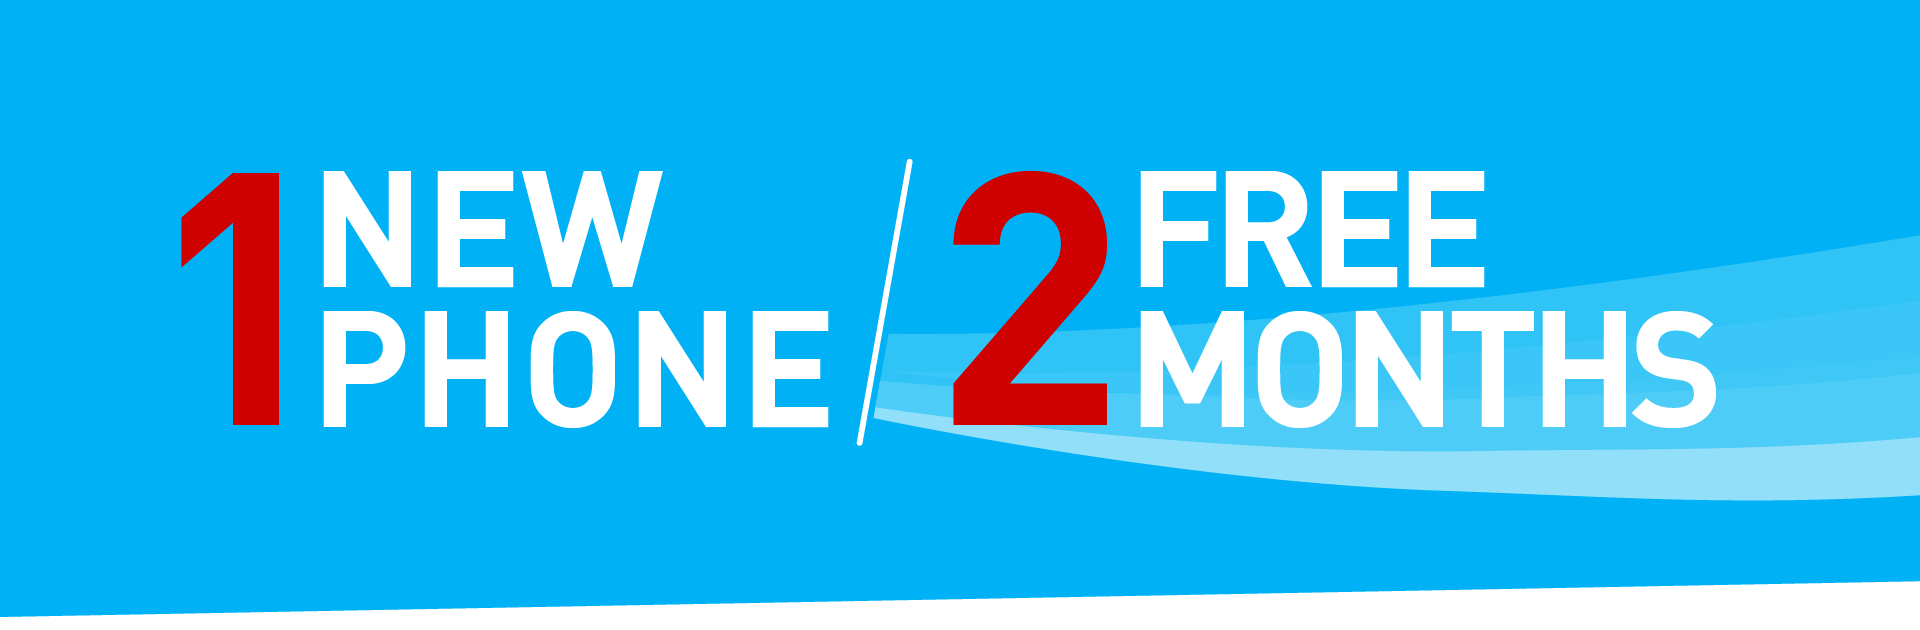 1 NEW PHONE / 2 FREE MONTHS